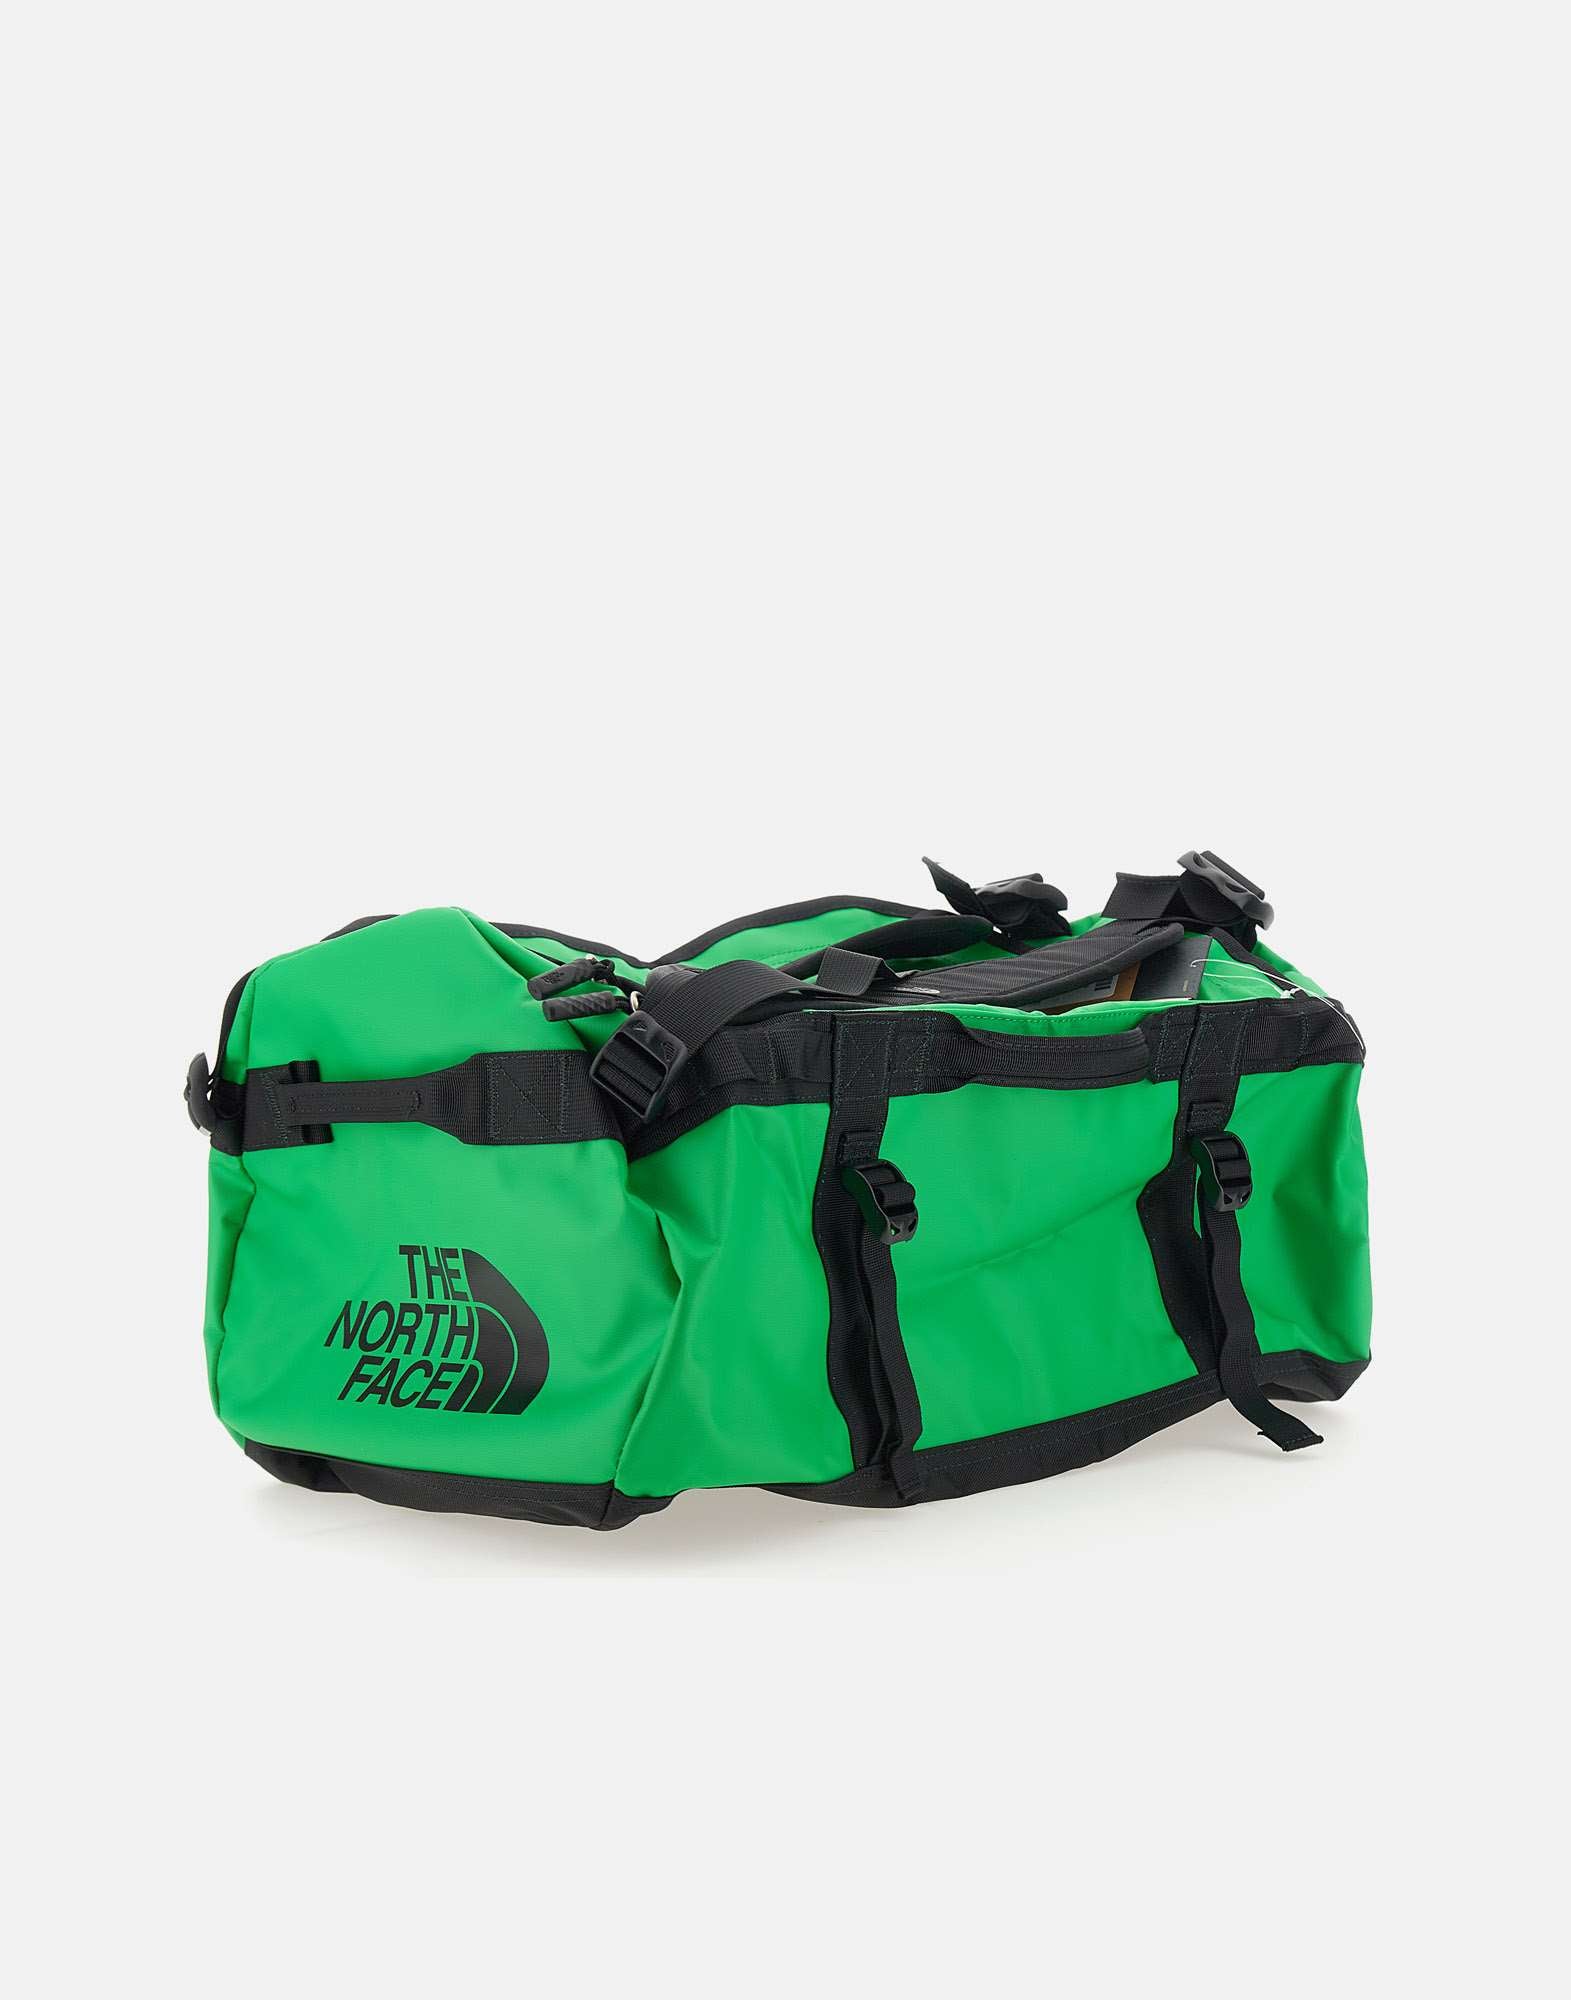 THE NORTH FACE NF0A52ST Man black/green Suitcases - Zuklat